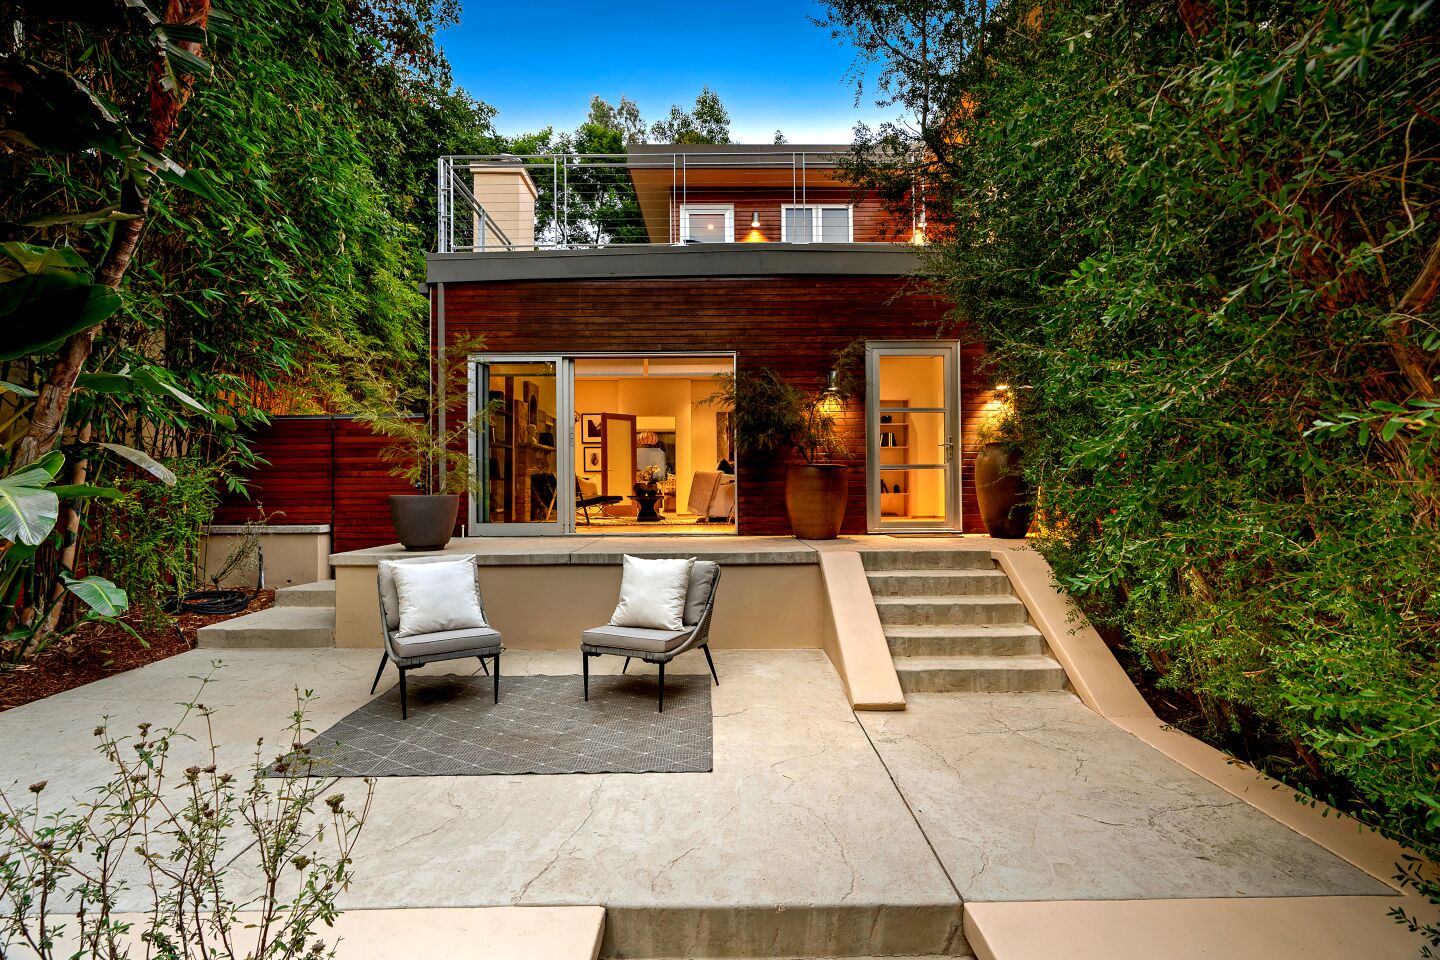 A series of patios fill the tiered courtyard of Josh Lucas' home.